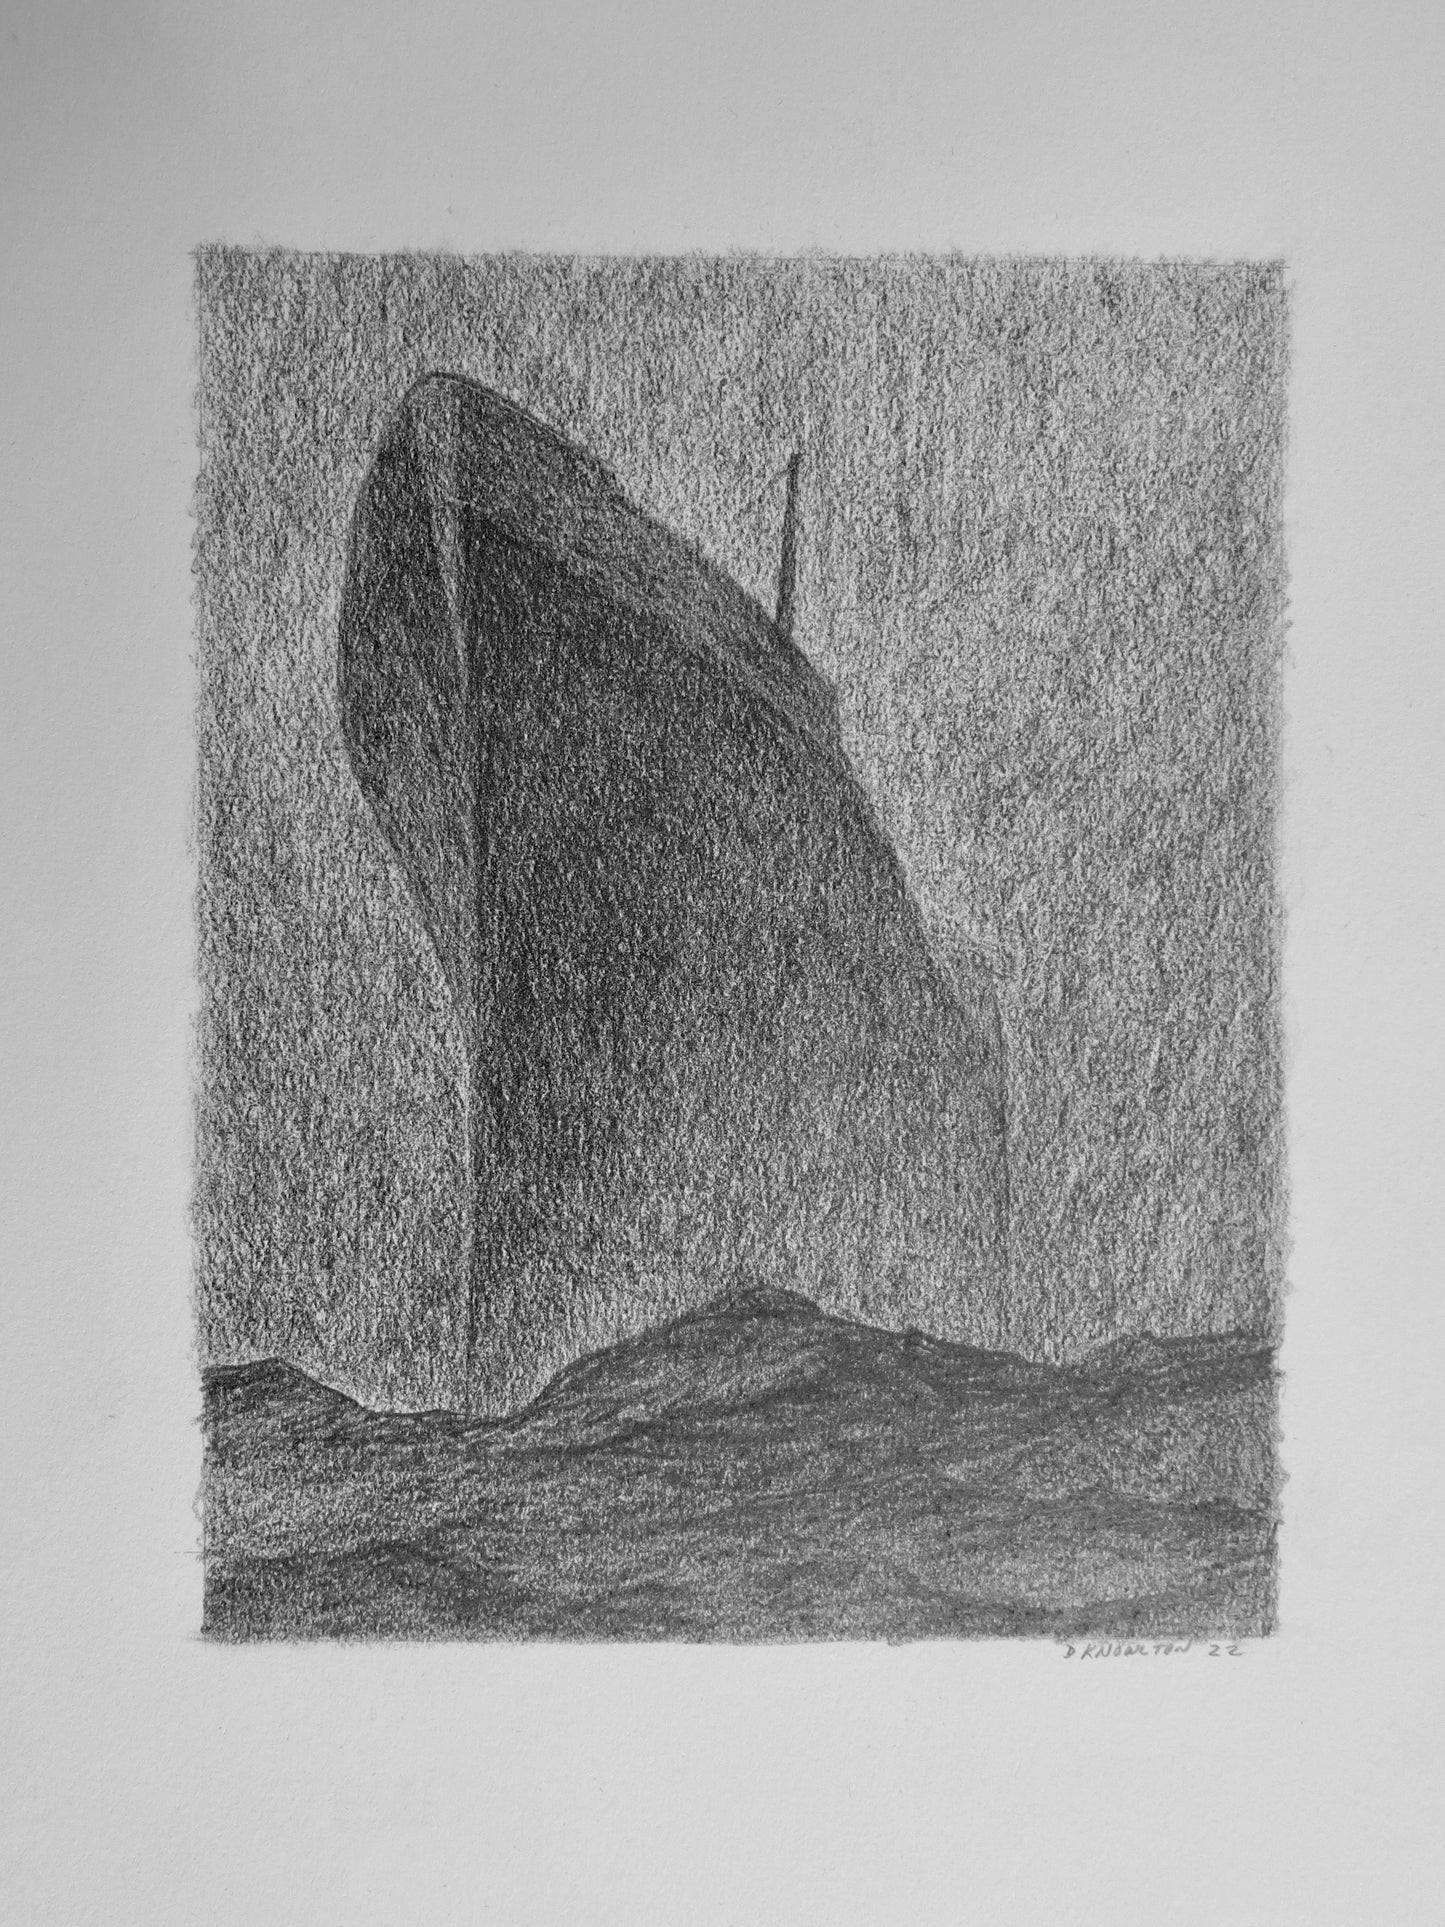 Study for Night Voyage-Drawing-David Knowlton-Sorrel Sky Gallery